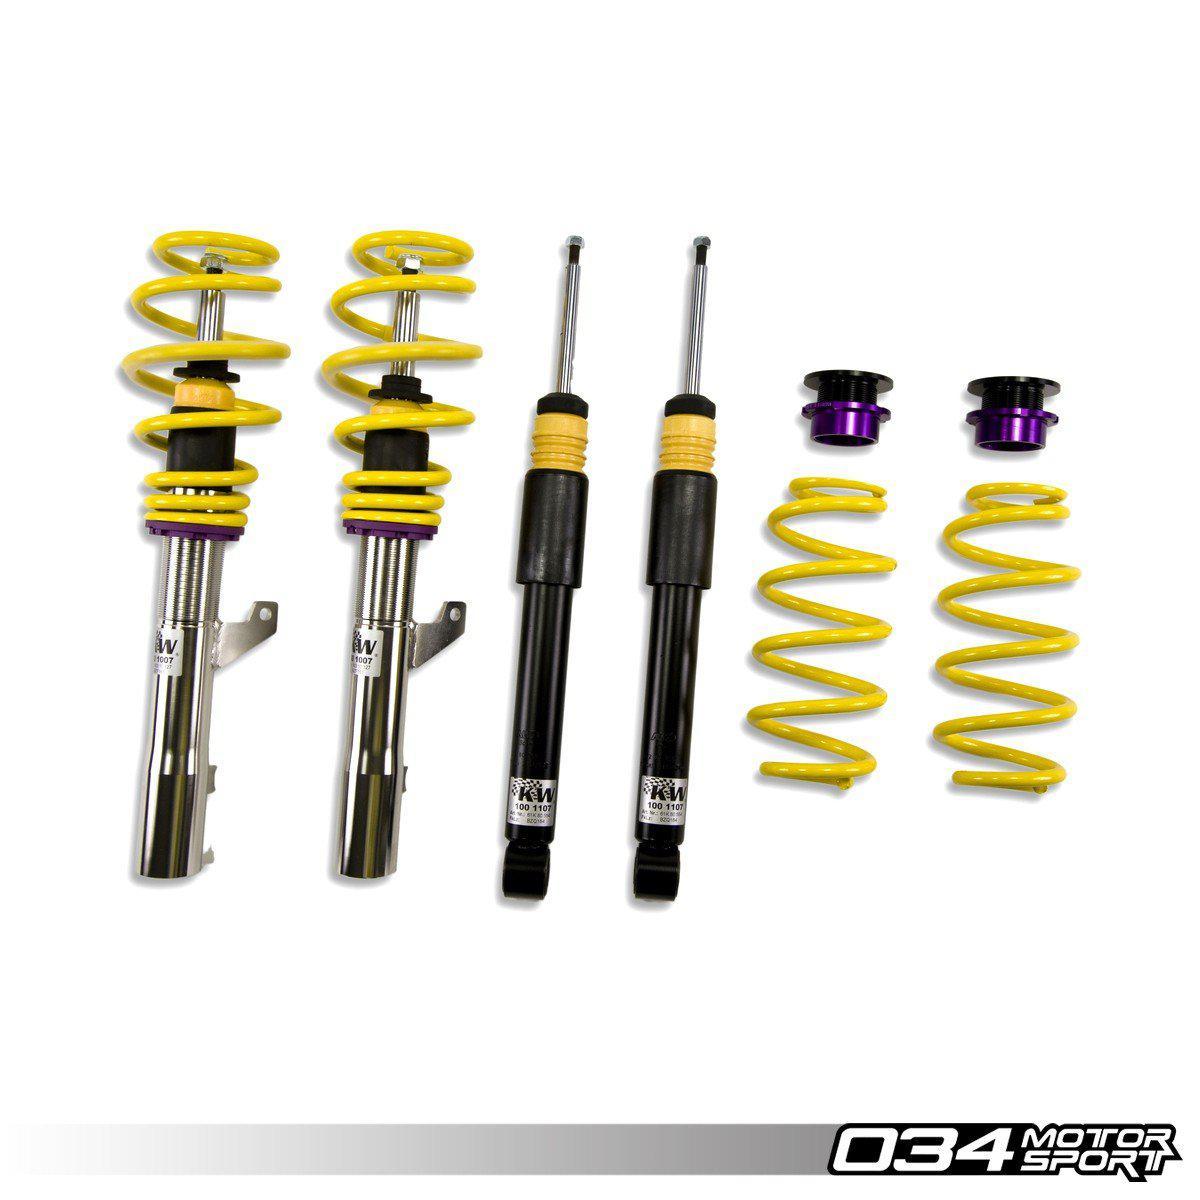 KW Variant 3 Coilover Suspension, Audi R8 V10 5.2l Fsi With Magnetic Ride-A Little Tuning Co